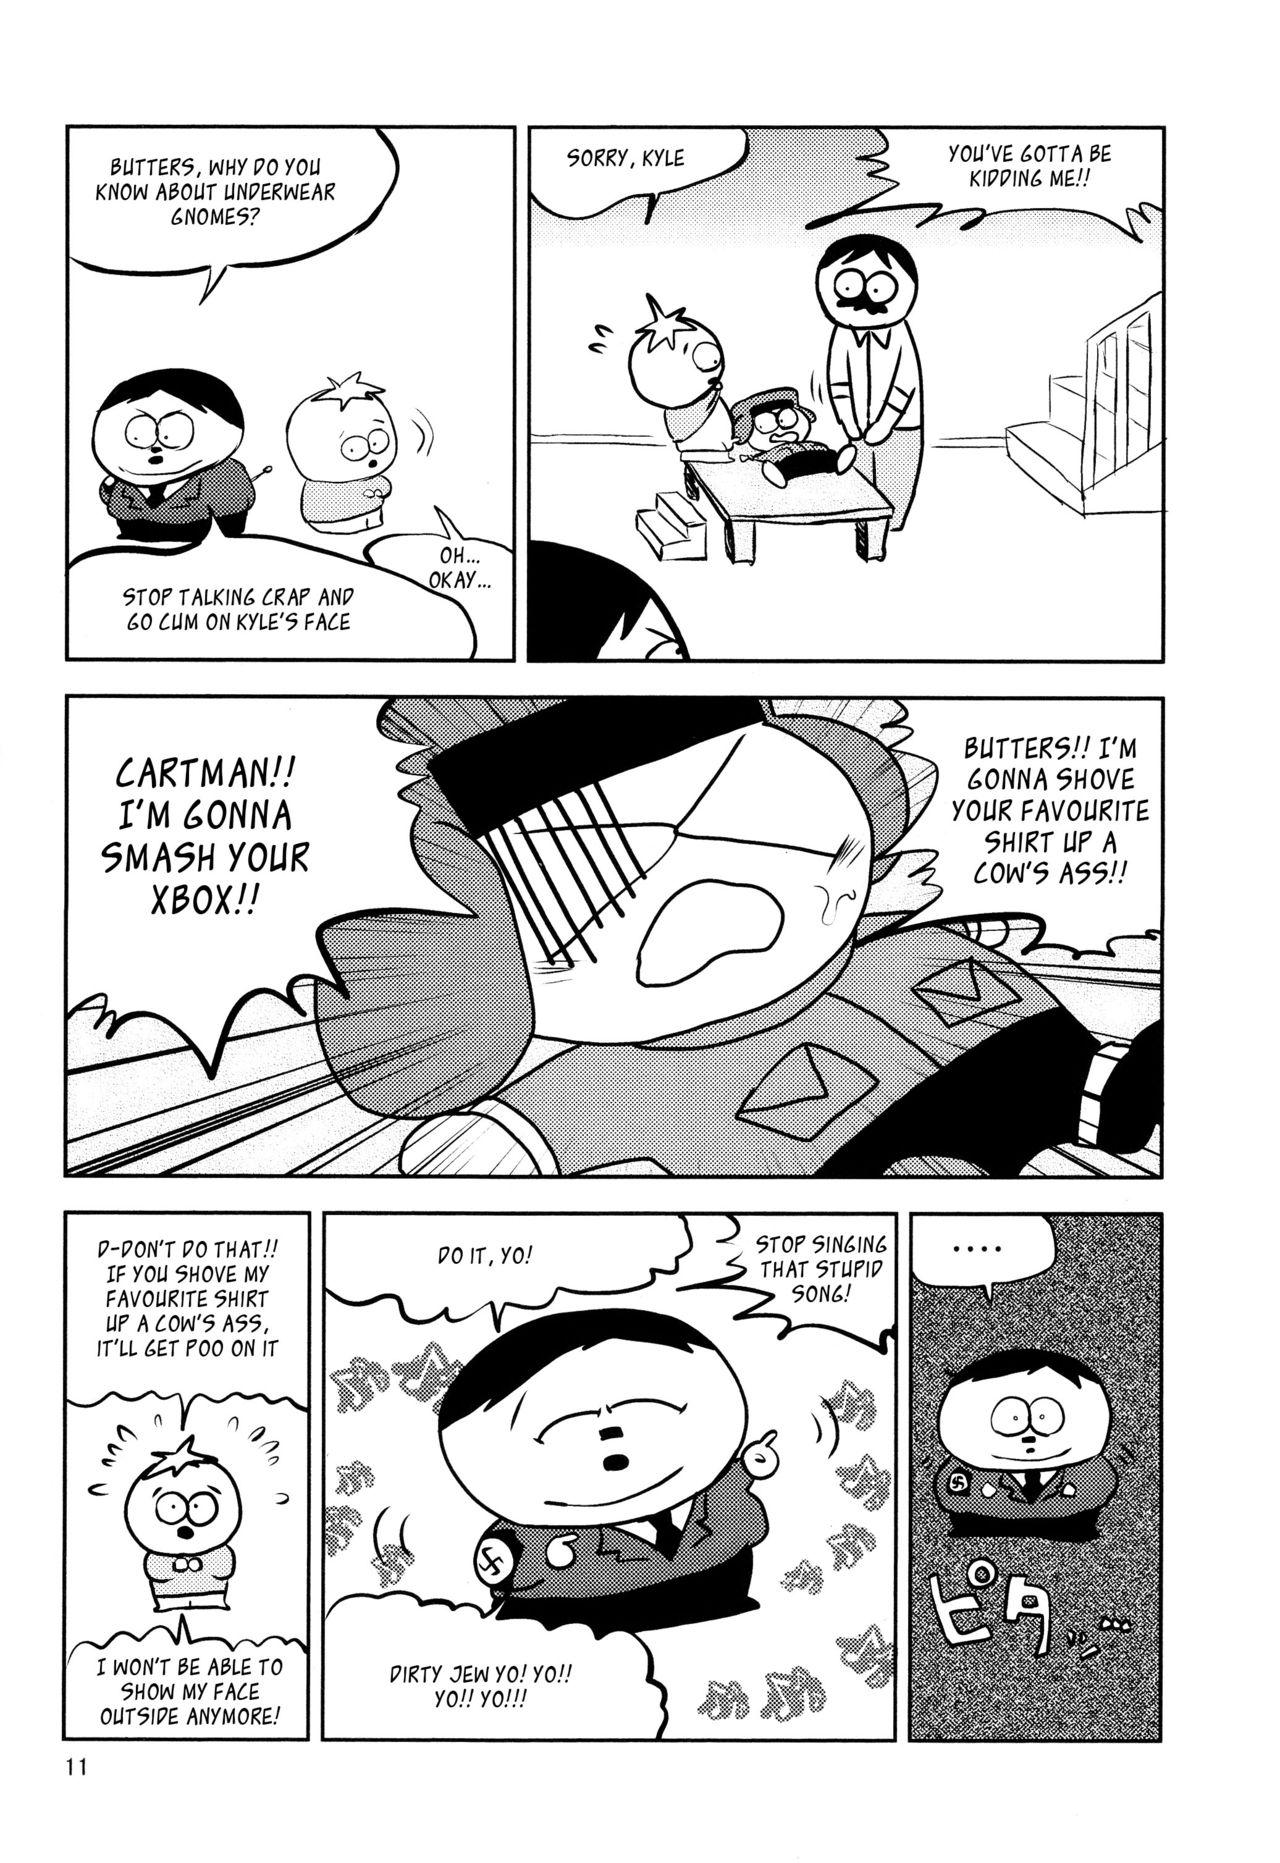 Condom Lovely Hitler's Counterattack - South park Bush - Page 11